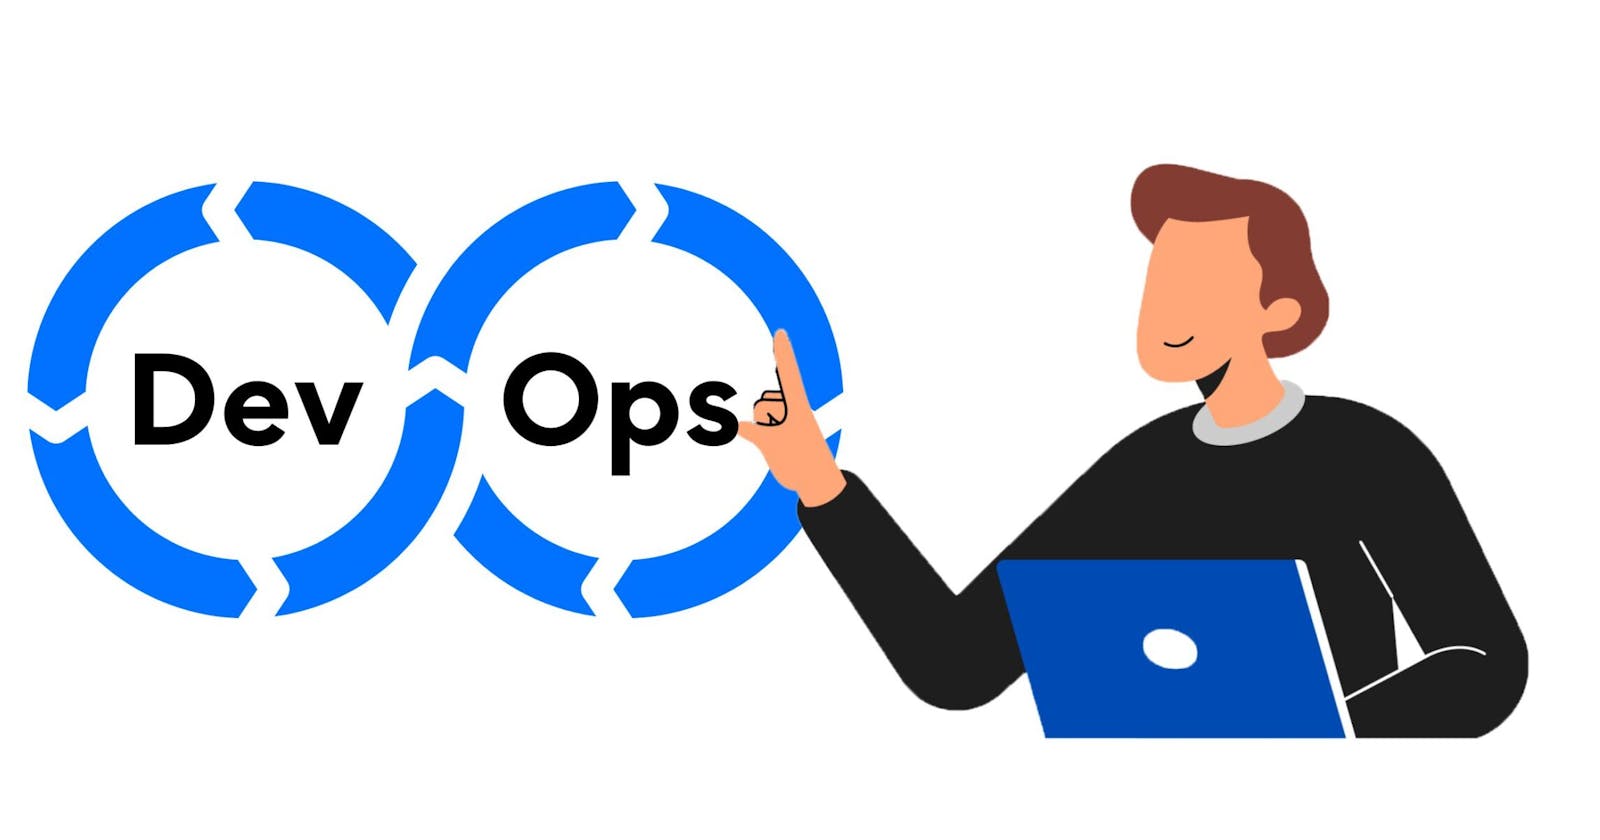 What is DevOps? Why it is important?